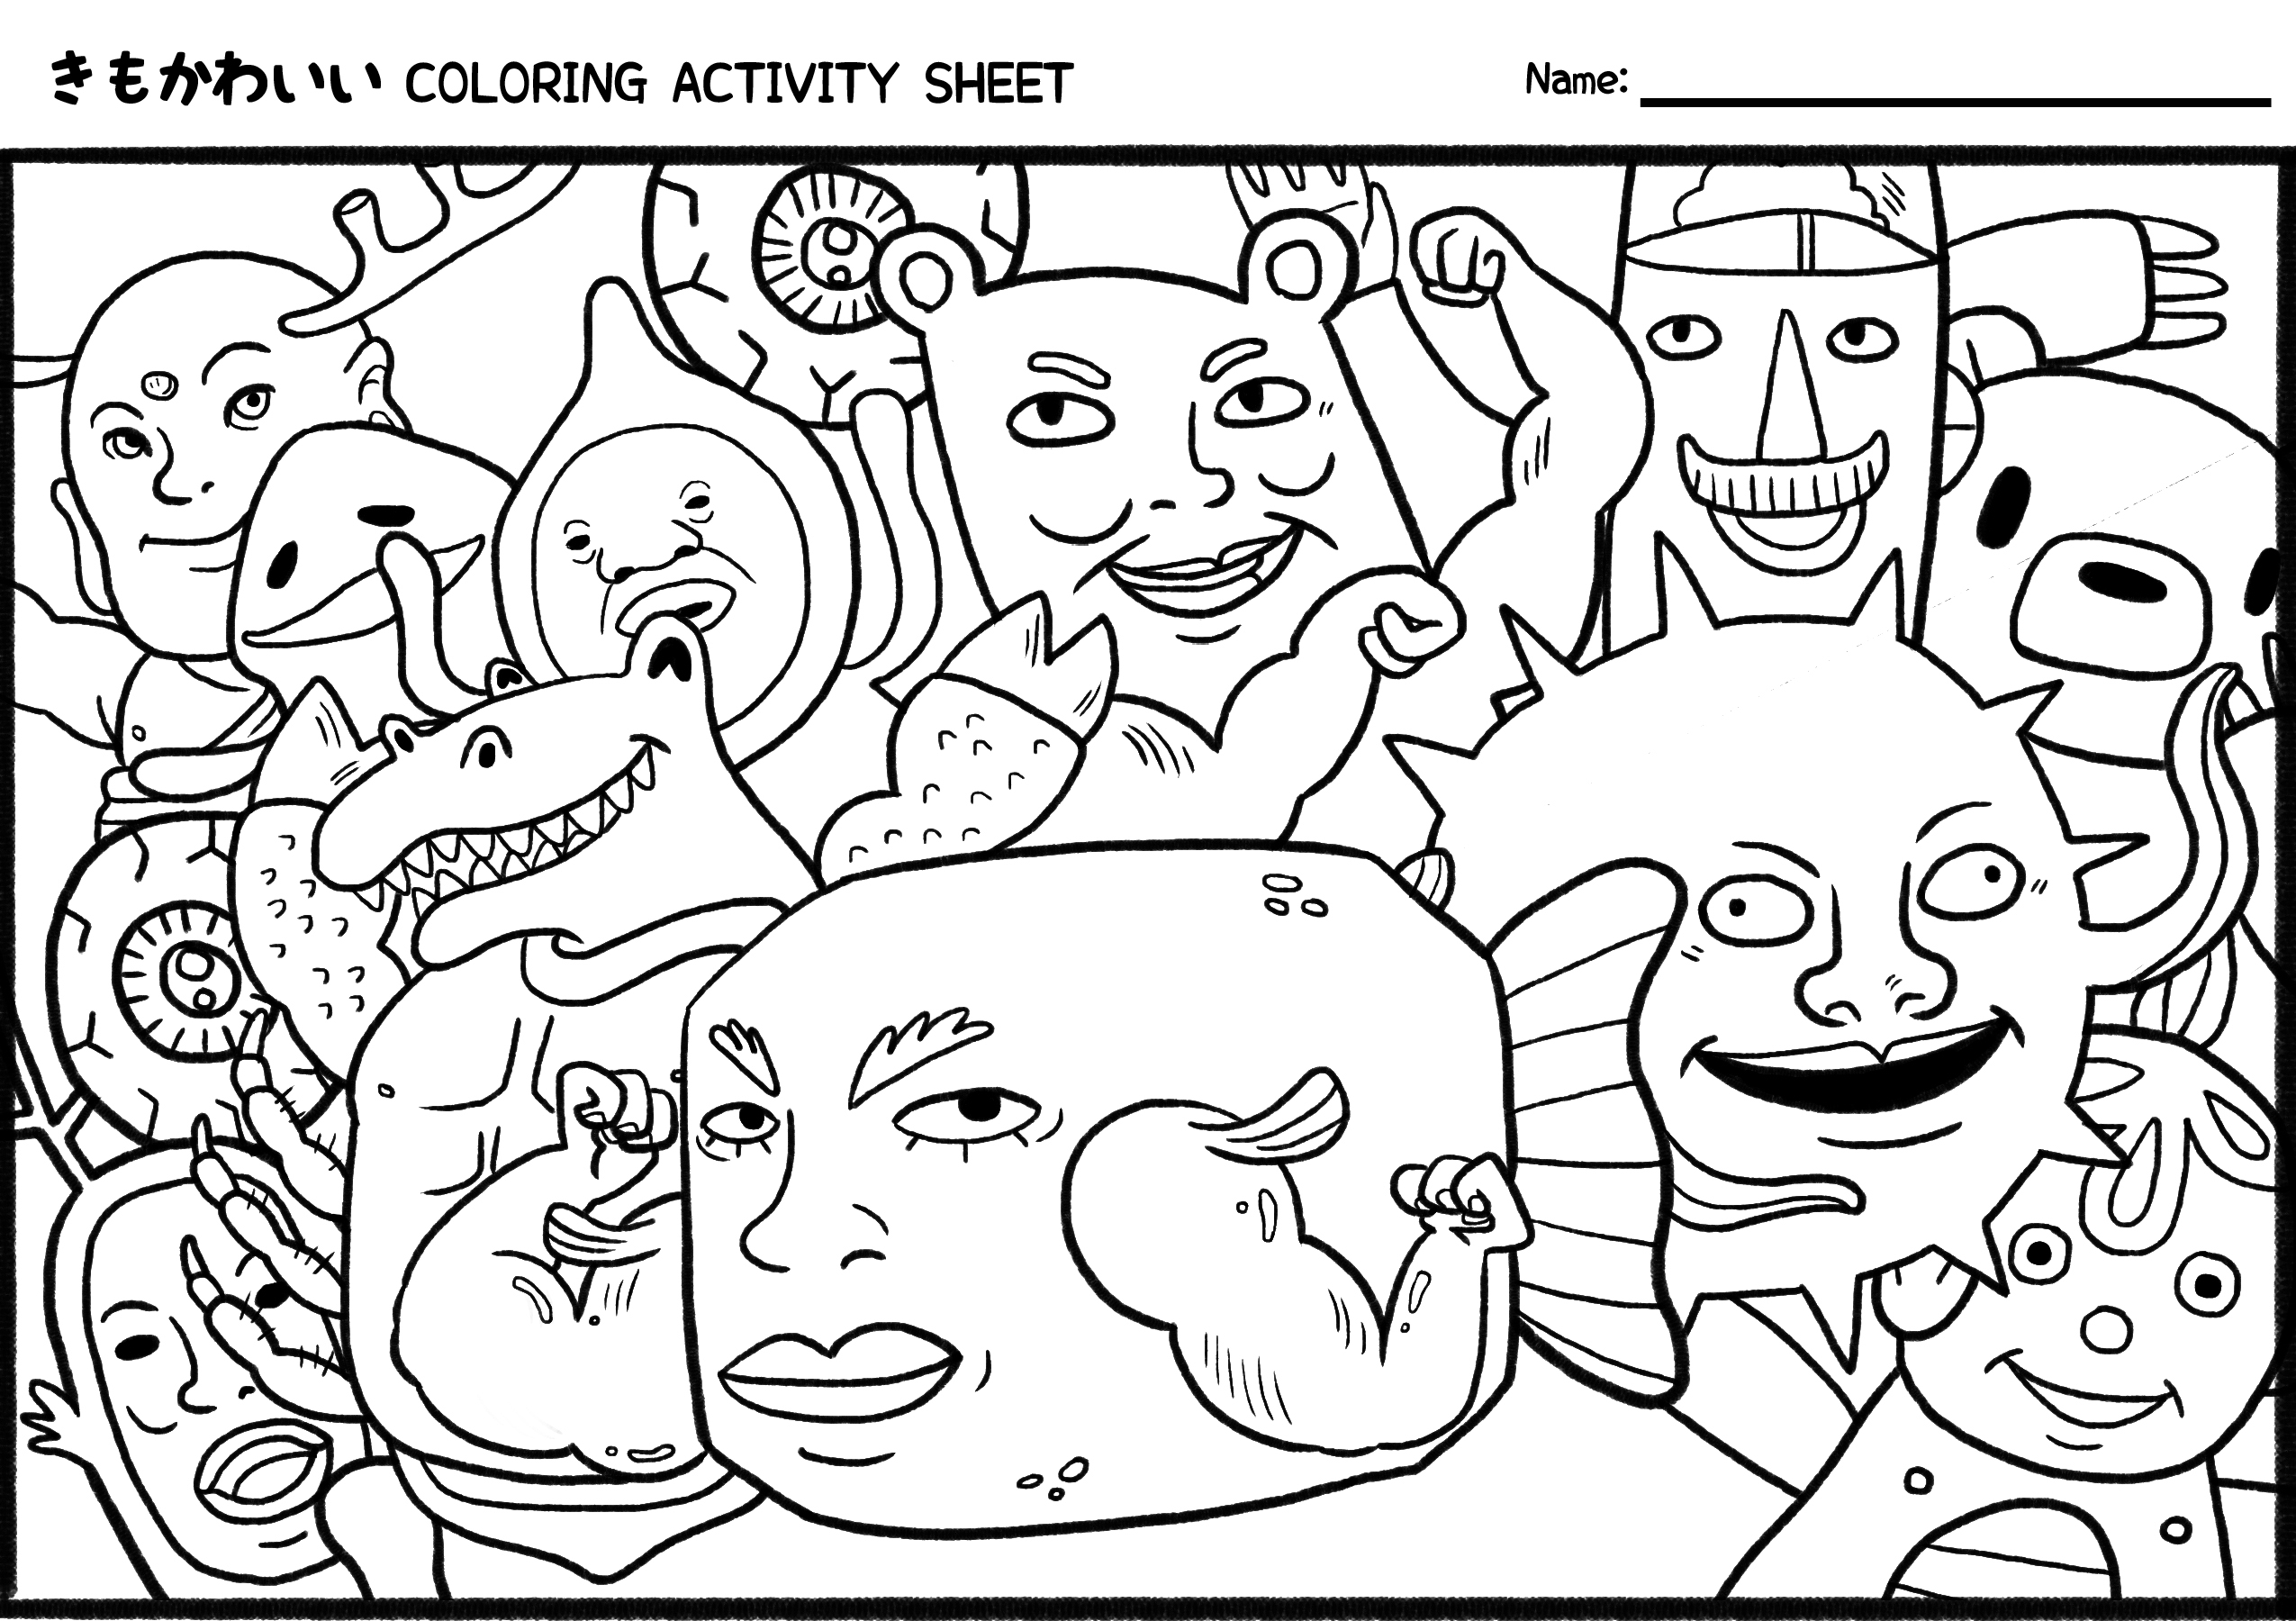 Squid Coloring Pages Printable Squid Coloring Pages Free Free Coloring Book